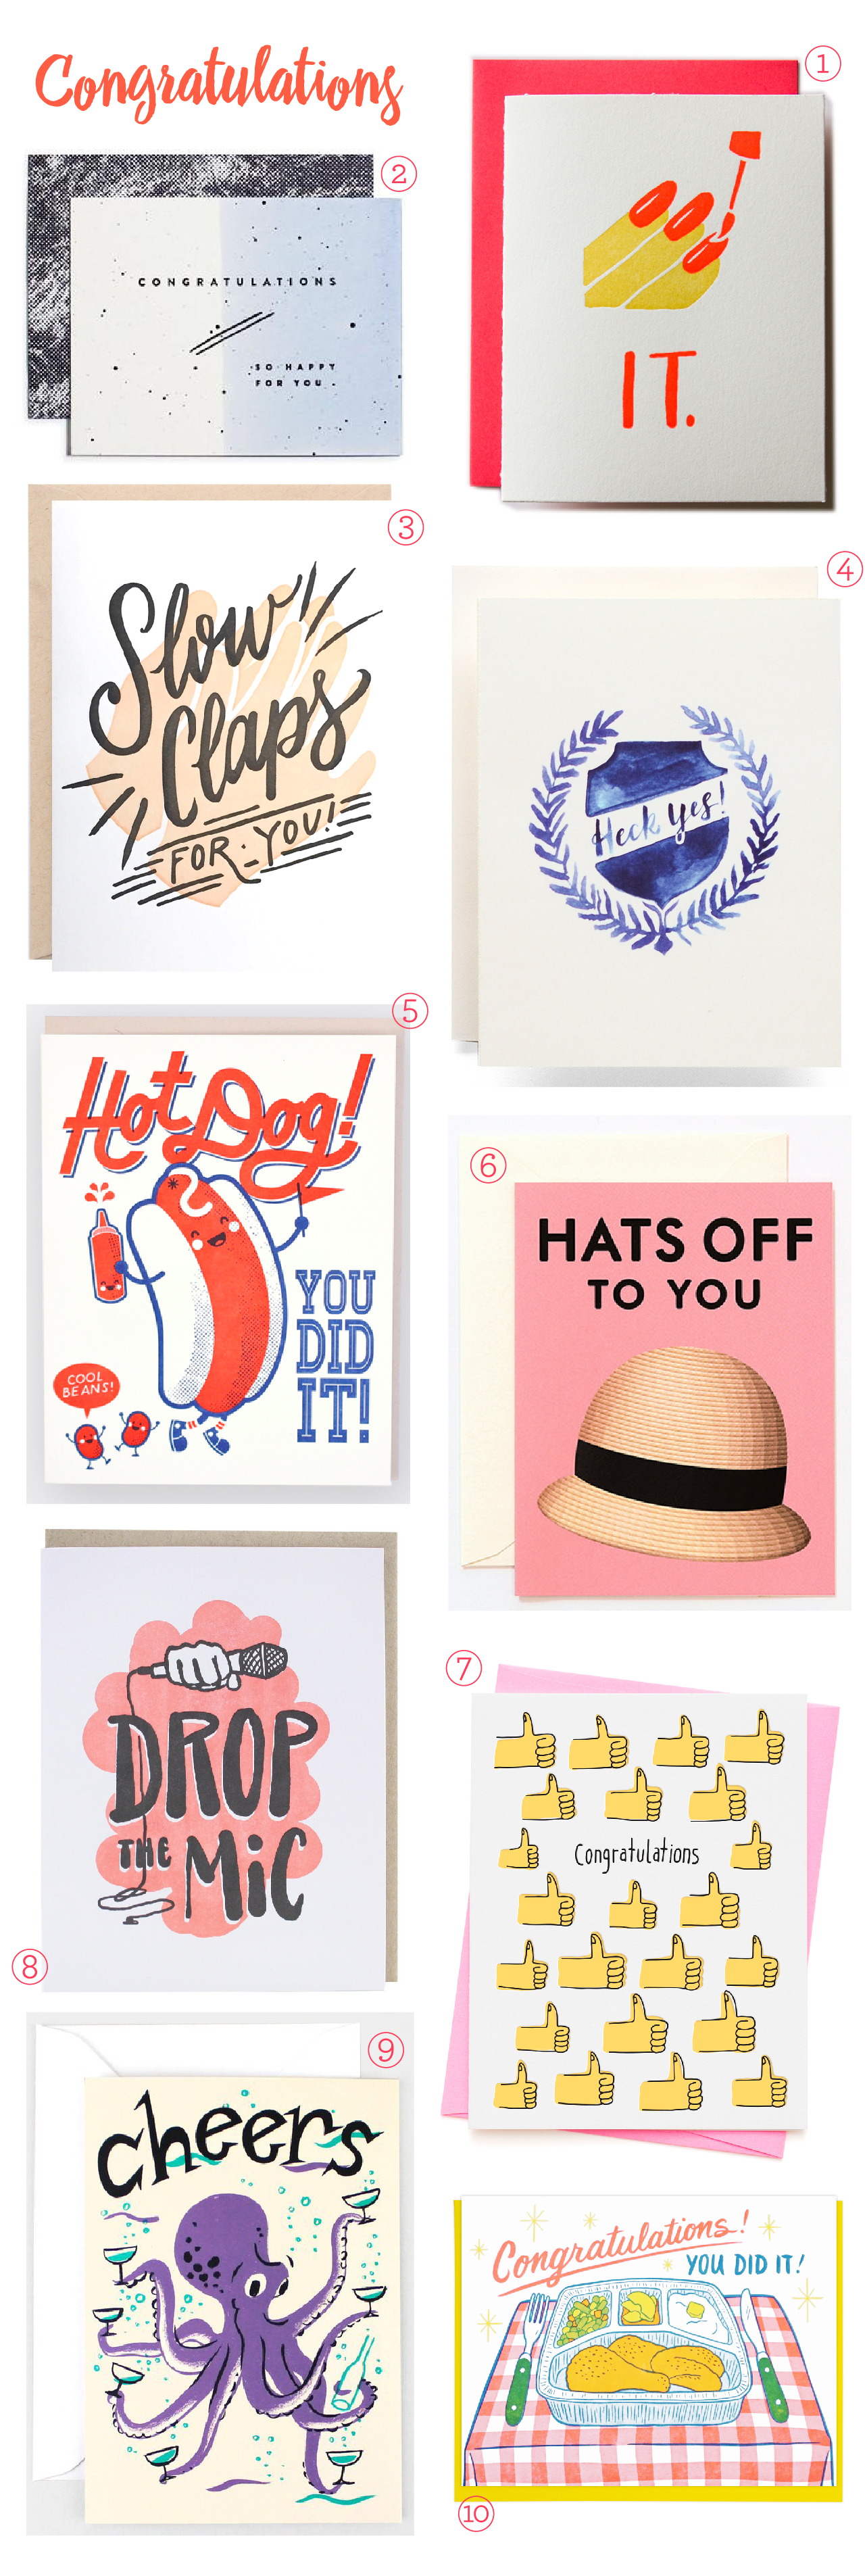 Stationery A-Z: Congratulations Card Round Up